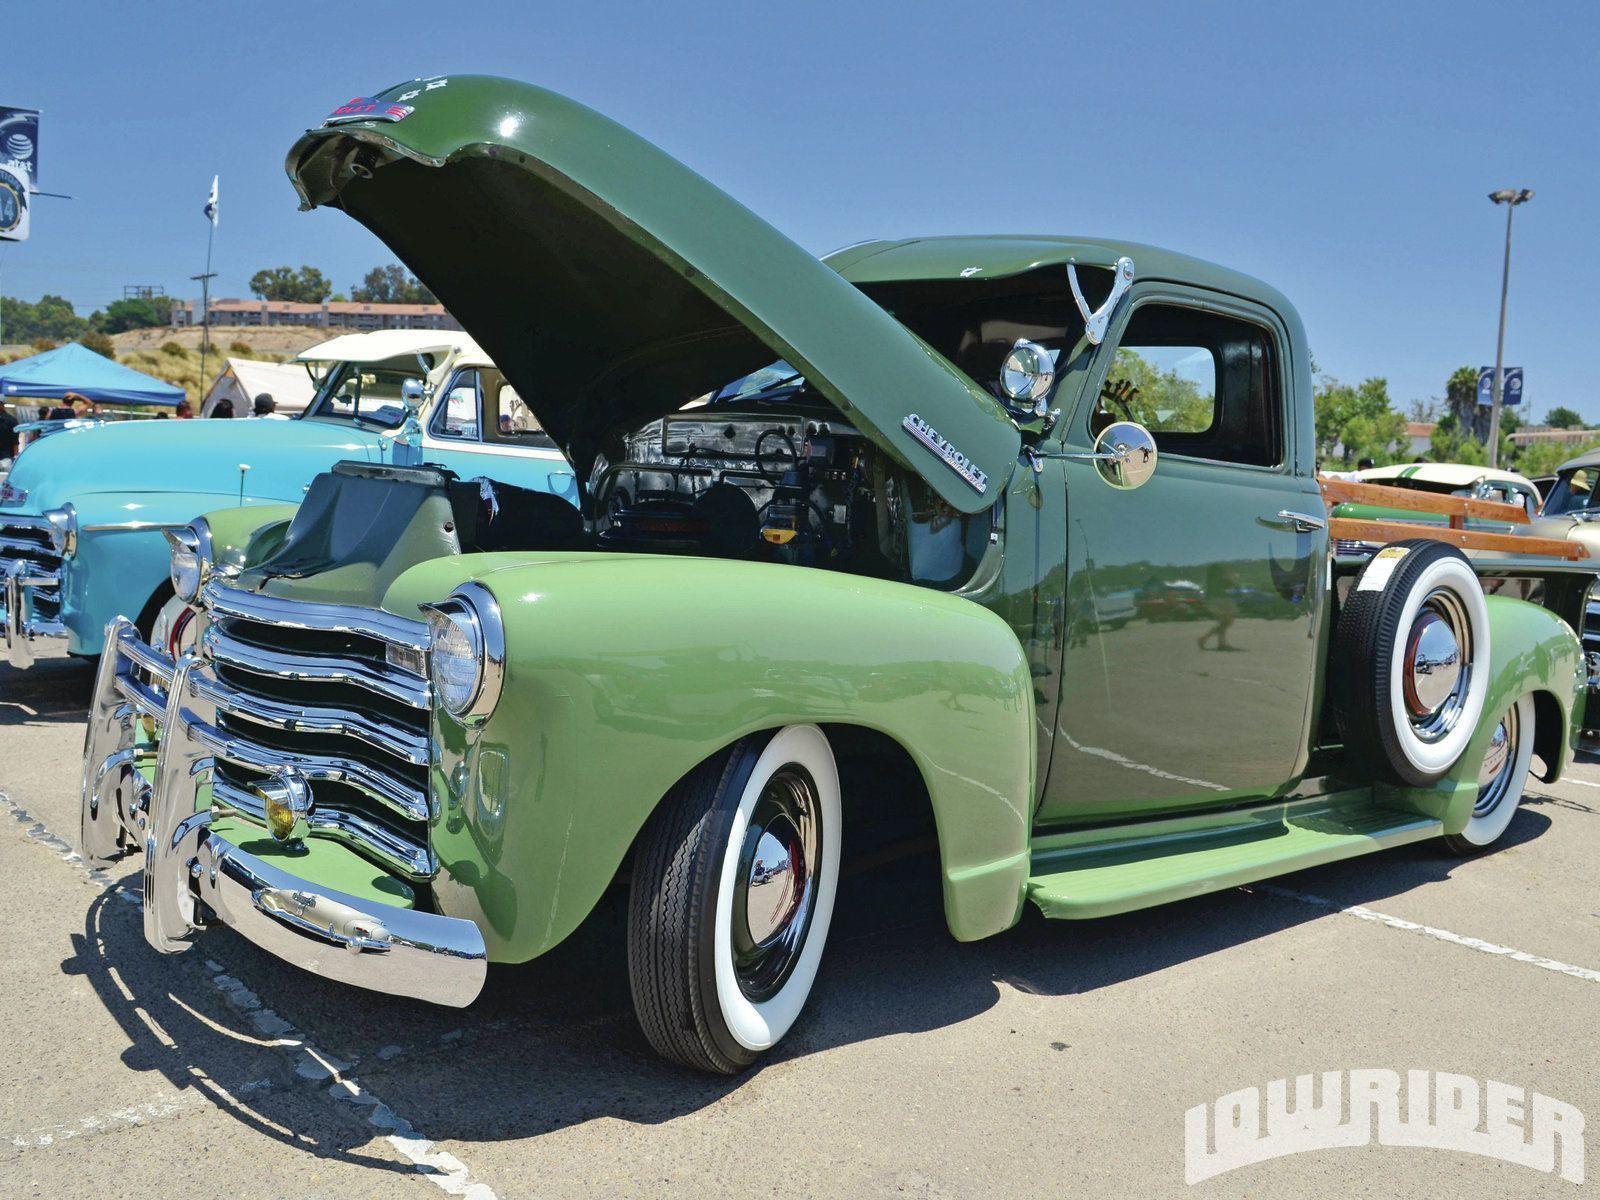 Free Download Lowrider Trucks Wallpapers 1600x1200 For Your Desktop Mobile Tablet Explore 60 Lowrider Trucks Wallpaper Custom Lowrider Wallpaper Lowrider Models Wallpaper Wallpaper Lowrider Cars